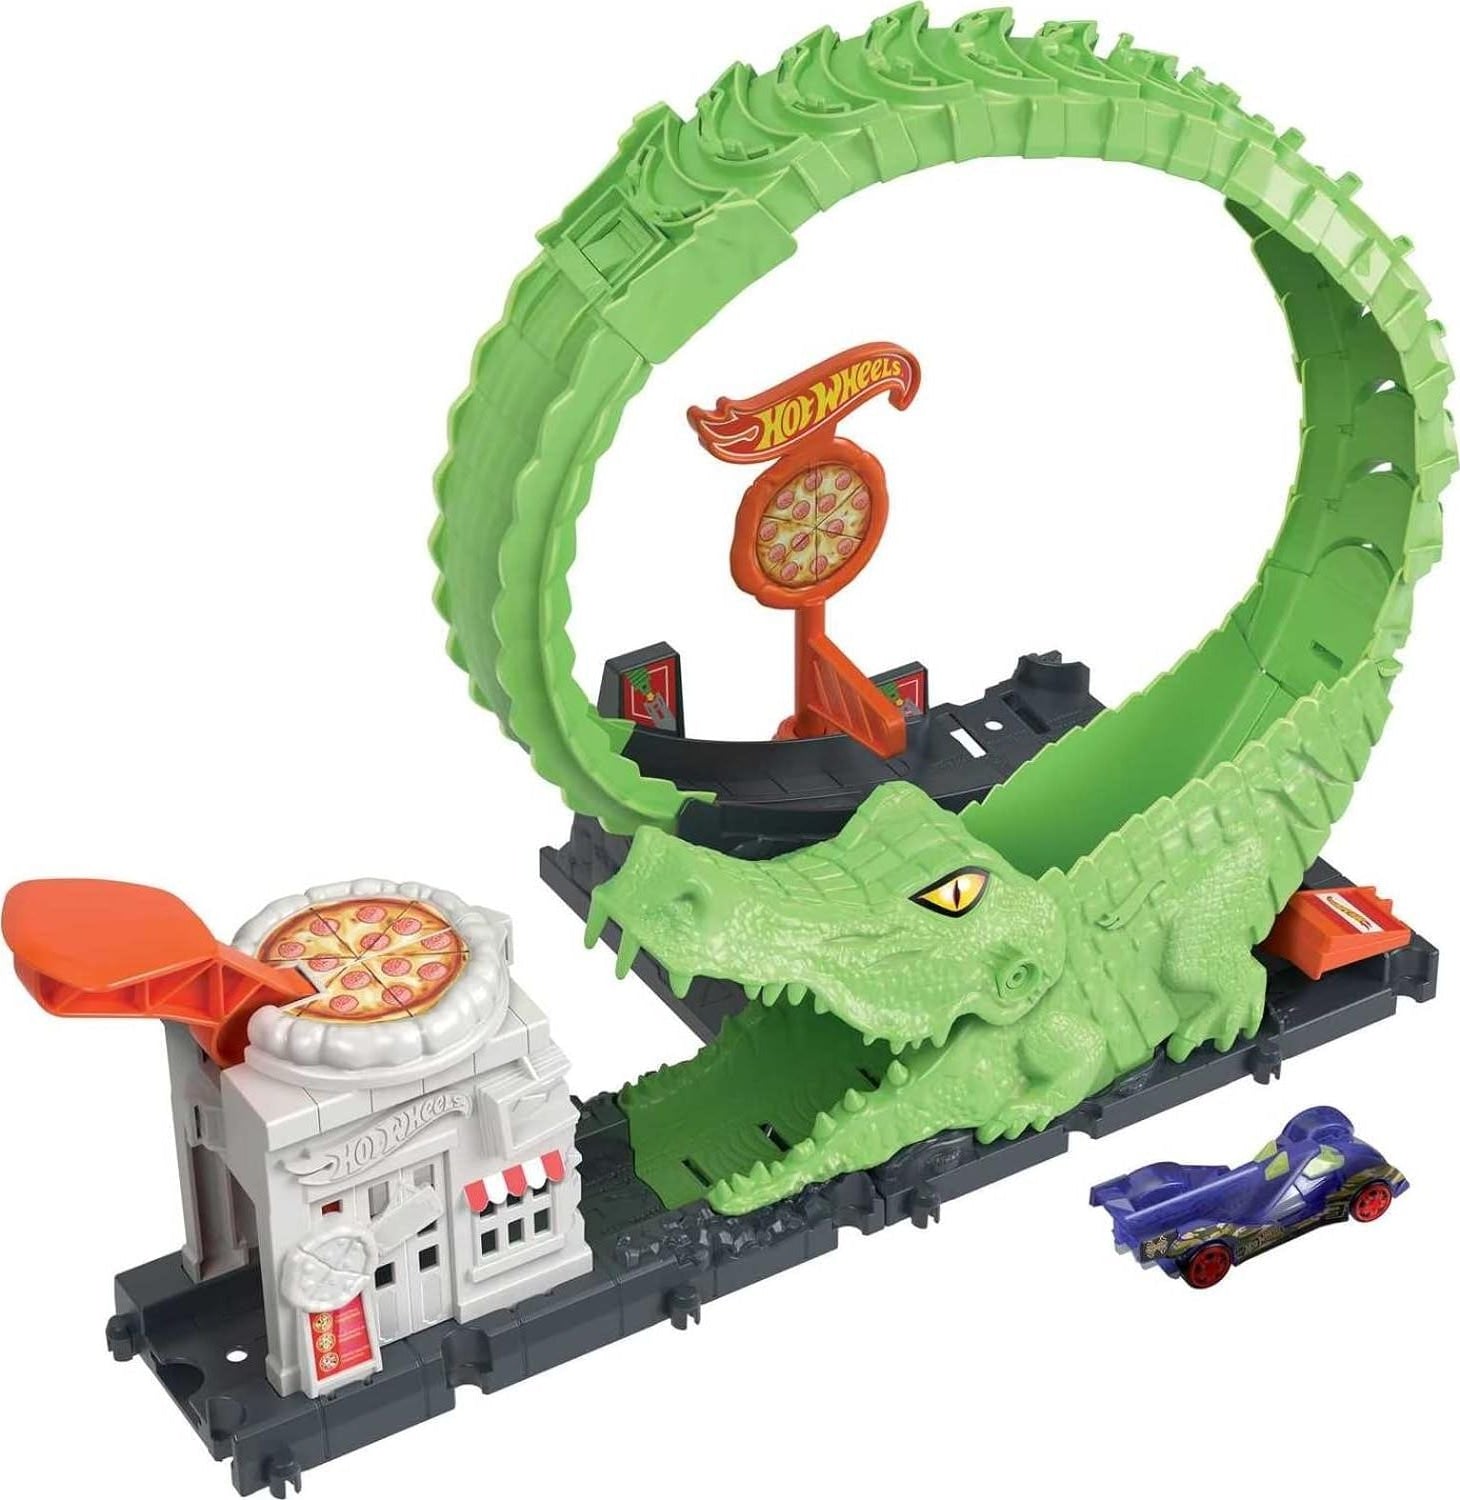 Hot Wheels Toy Car Track Set Gator Loop Attack Playset in Pizza Place with 1;64 Scale Car, Connects to Other Sets